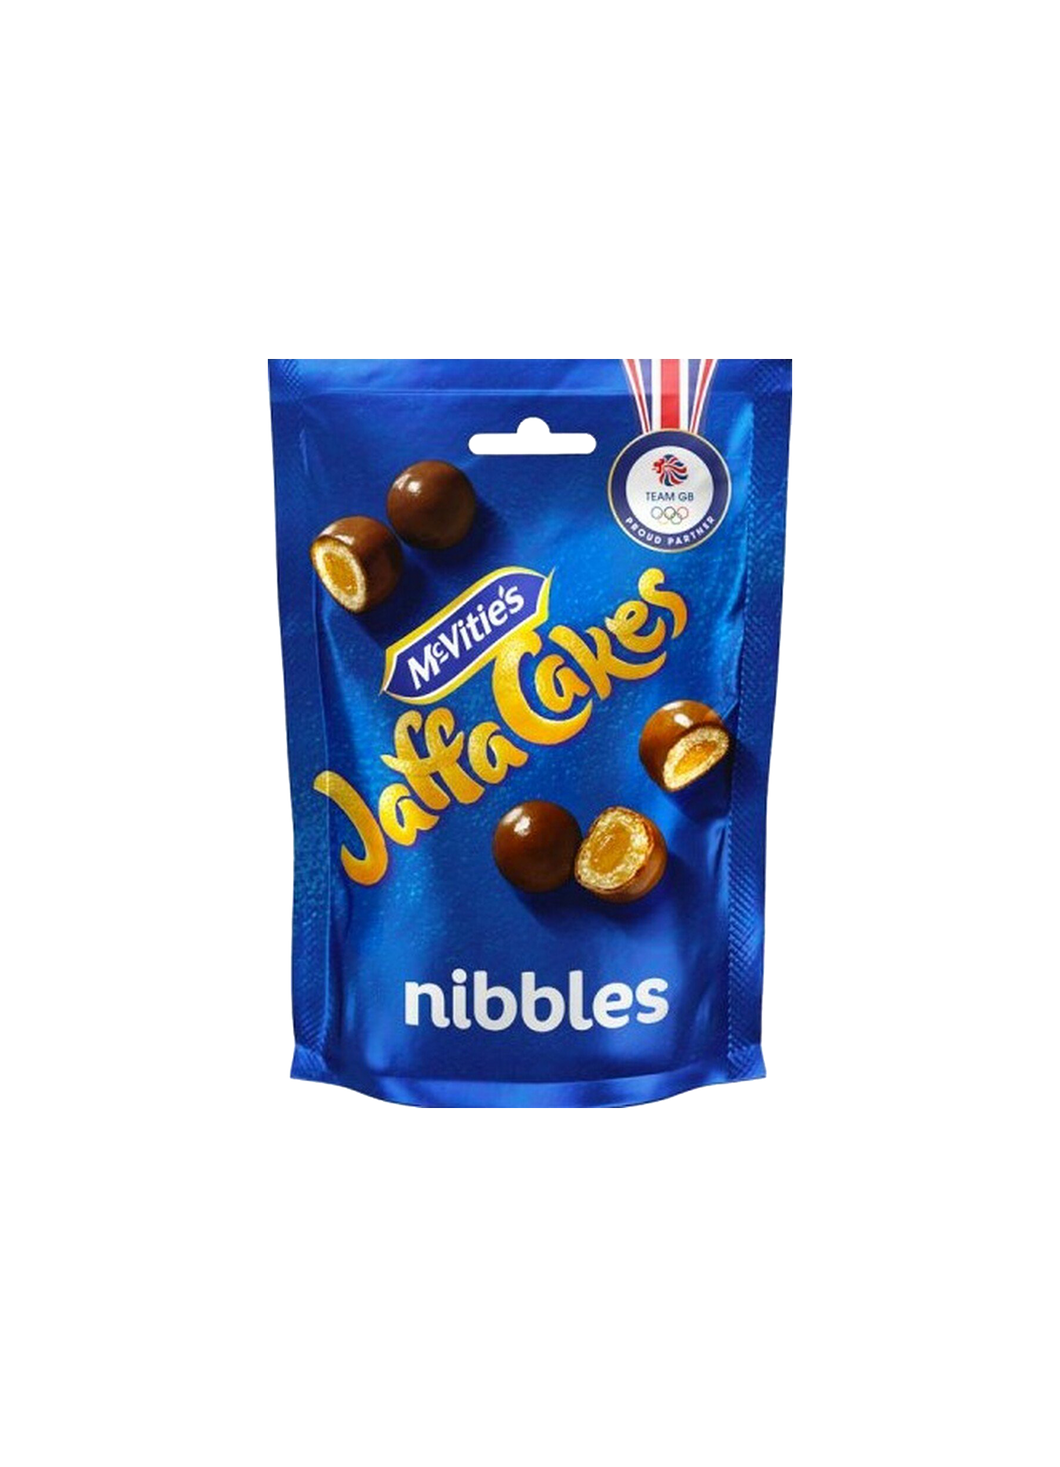 McVitie's Jaffa Cakes Nibbles